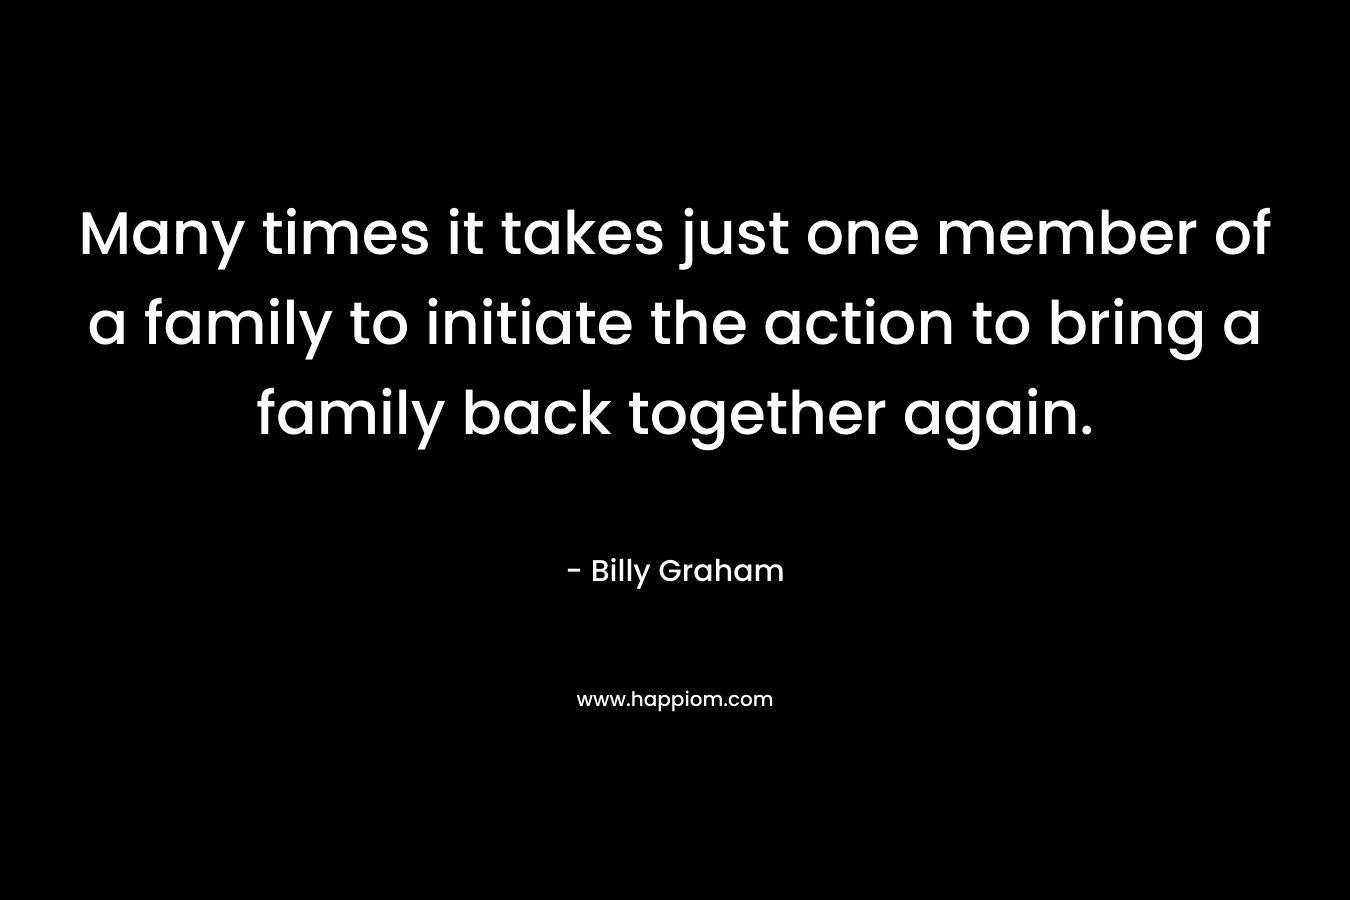 Many times it takes just one member of a family to initiate the action to bring a family back together again.